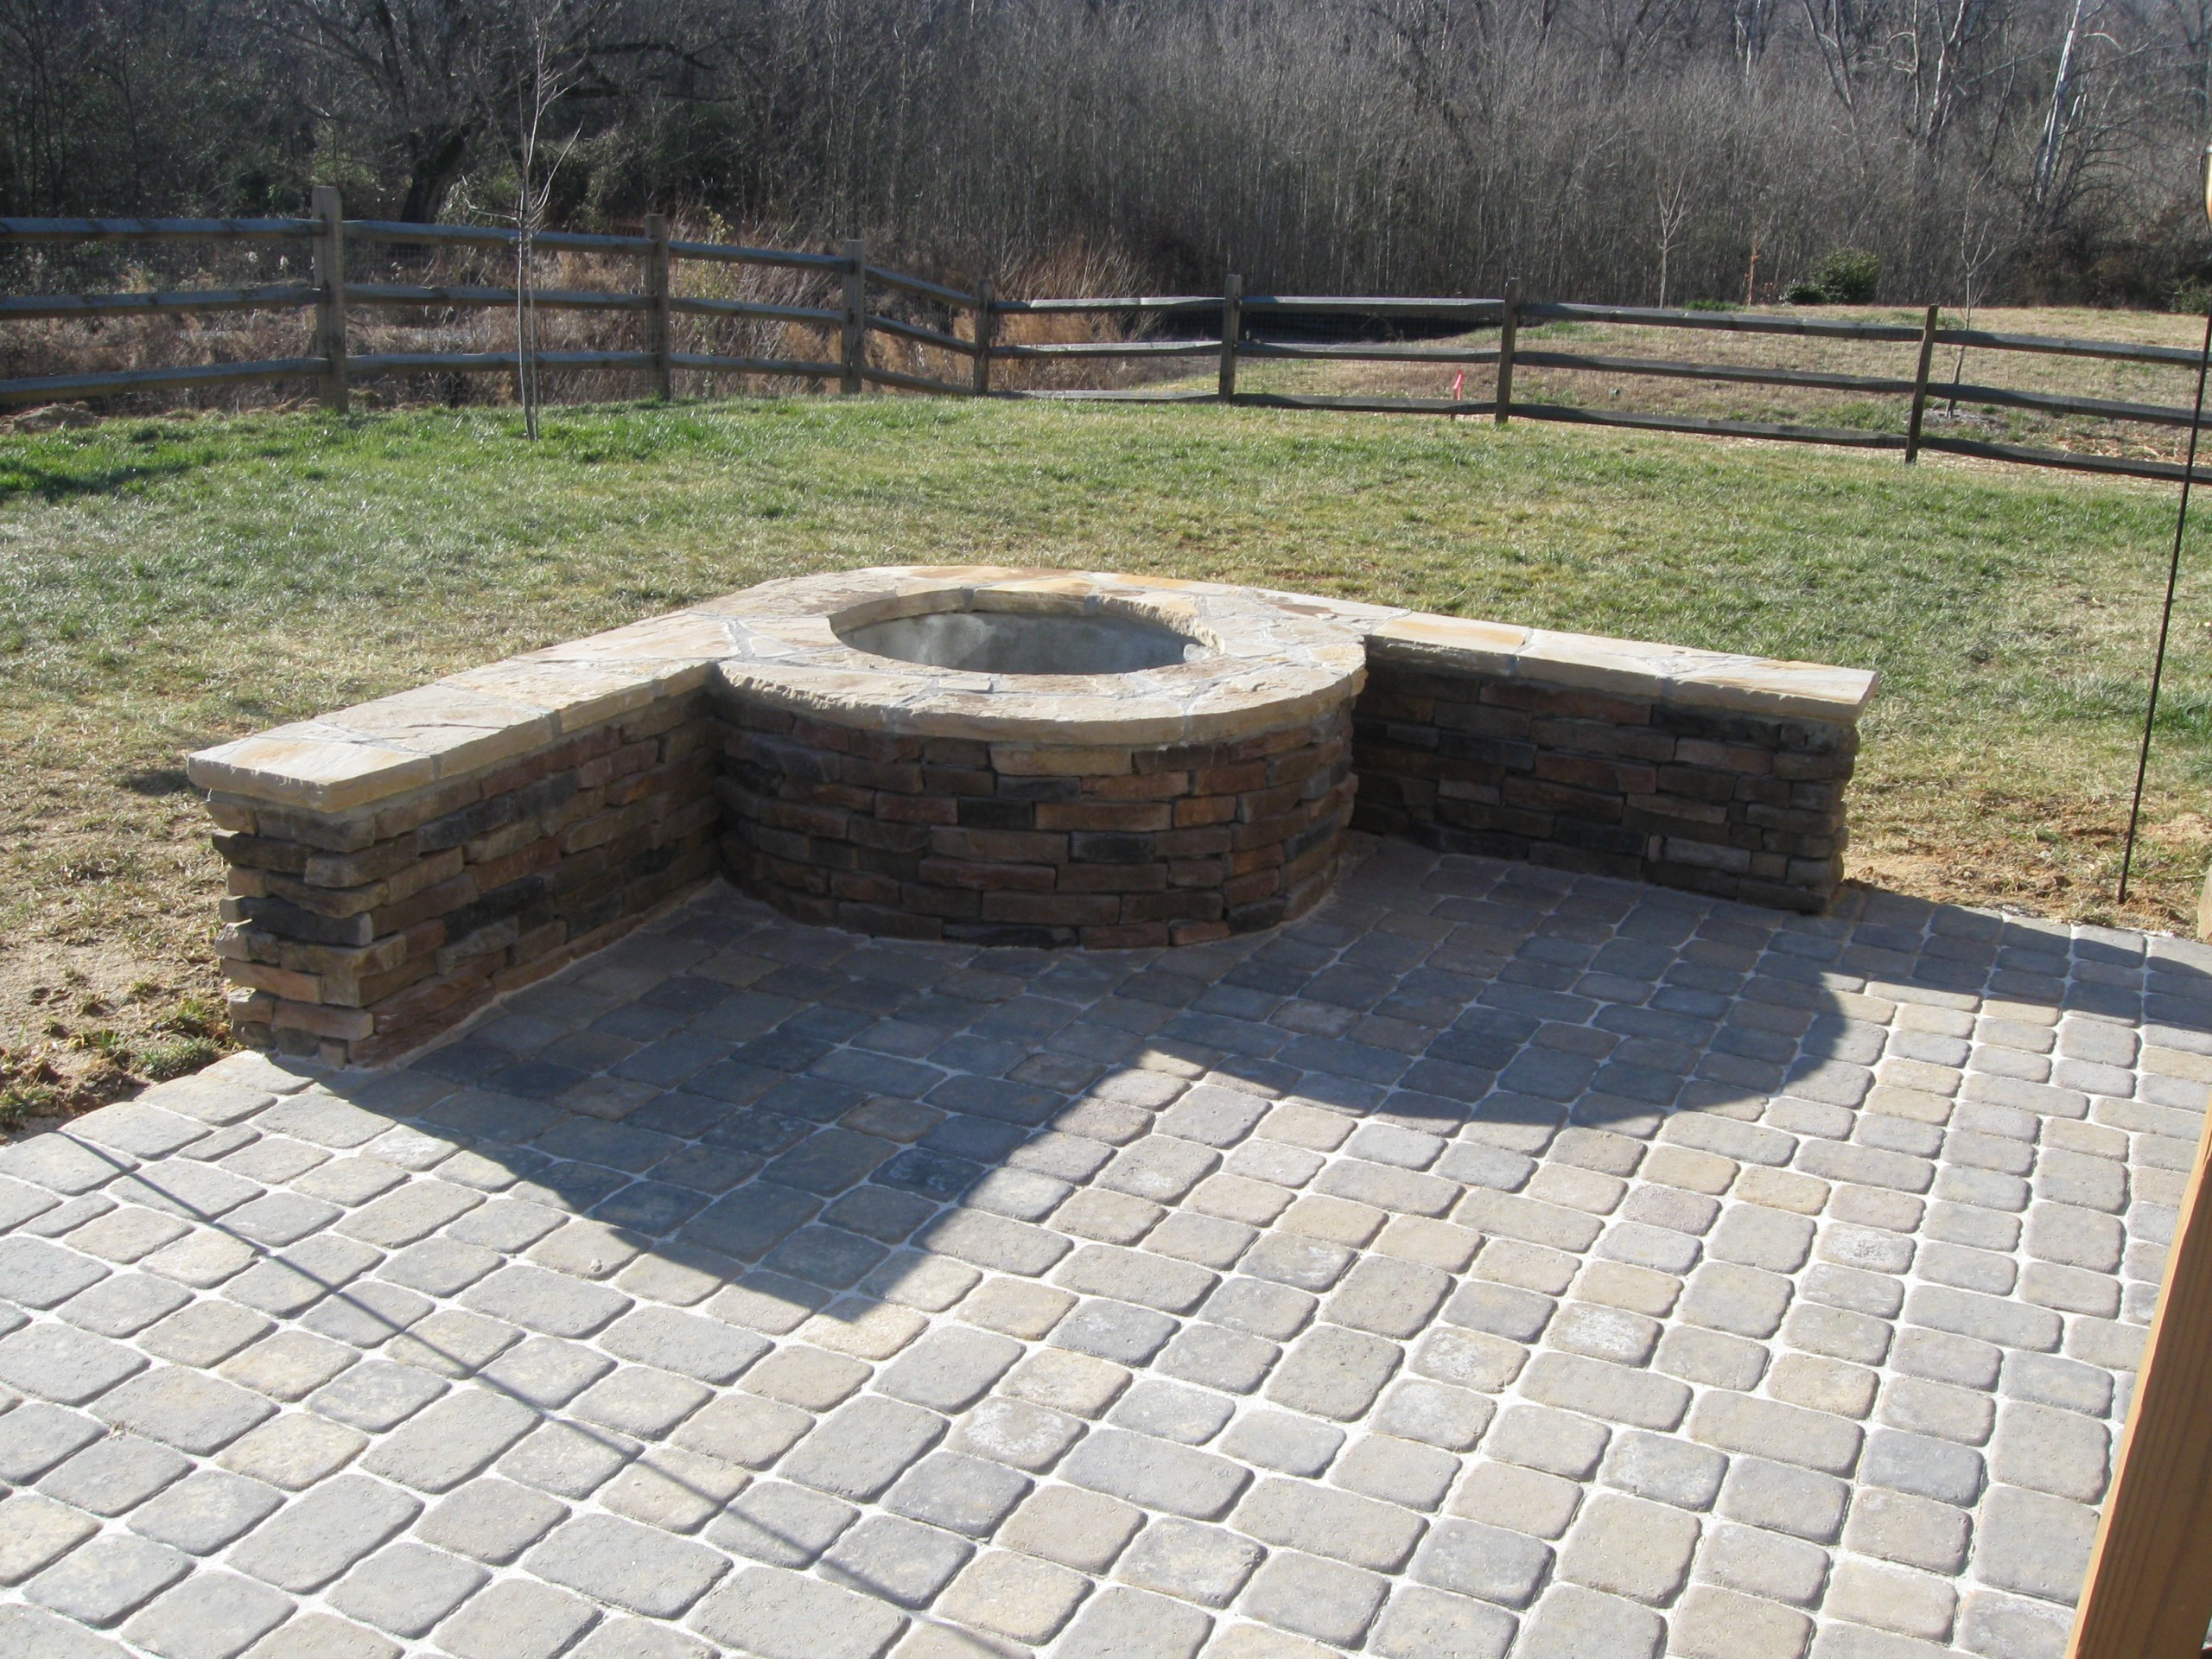 Rock Patio With Fire Pit
 How to select the best stone for my outdoor fireplace